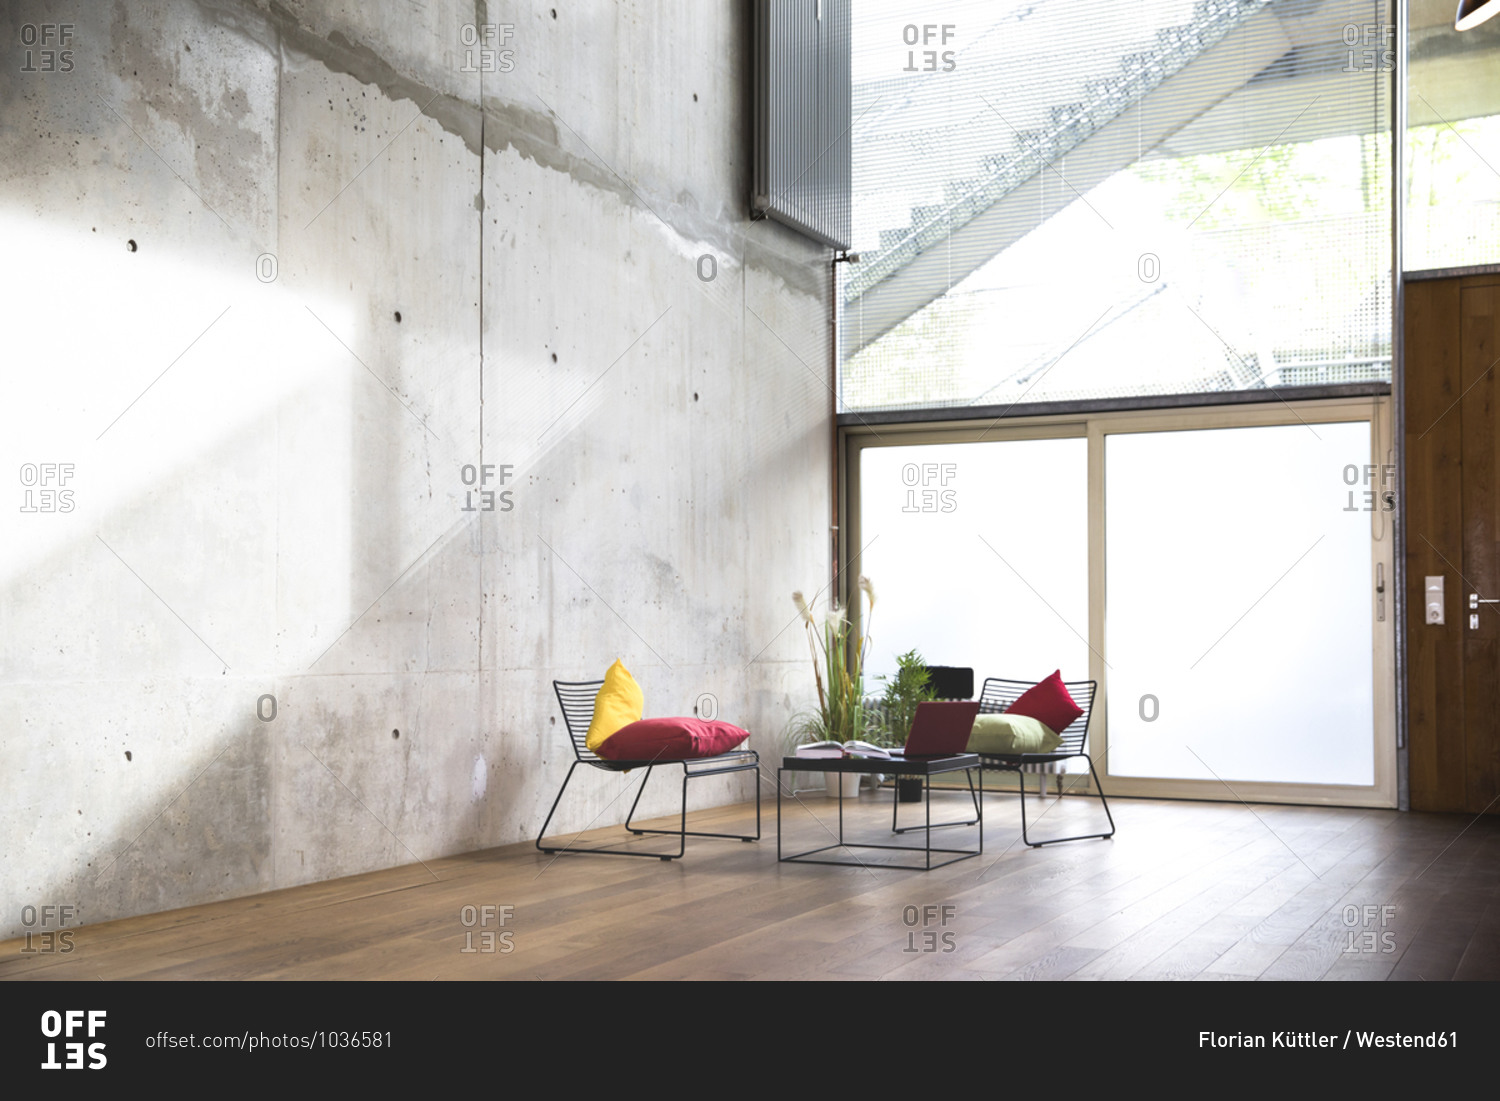 Sitting area in a loft at concrete wall stock photo -
OFFSET